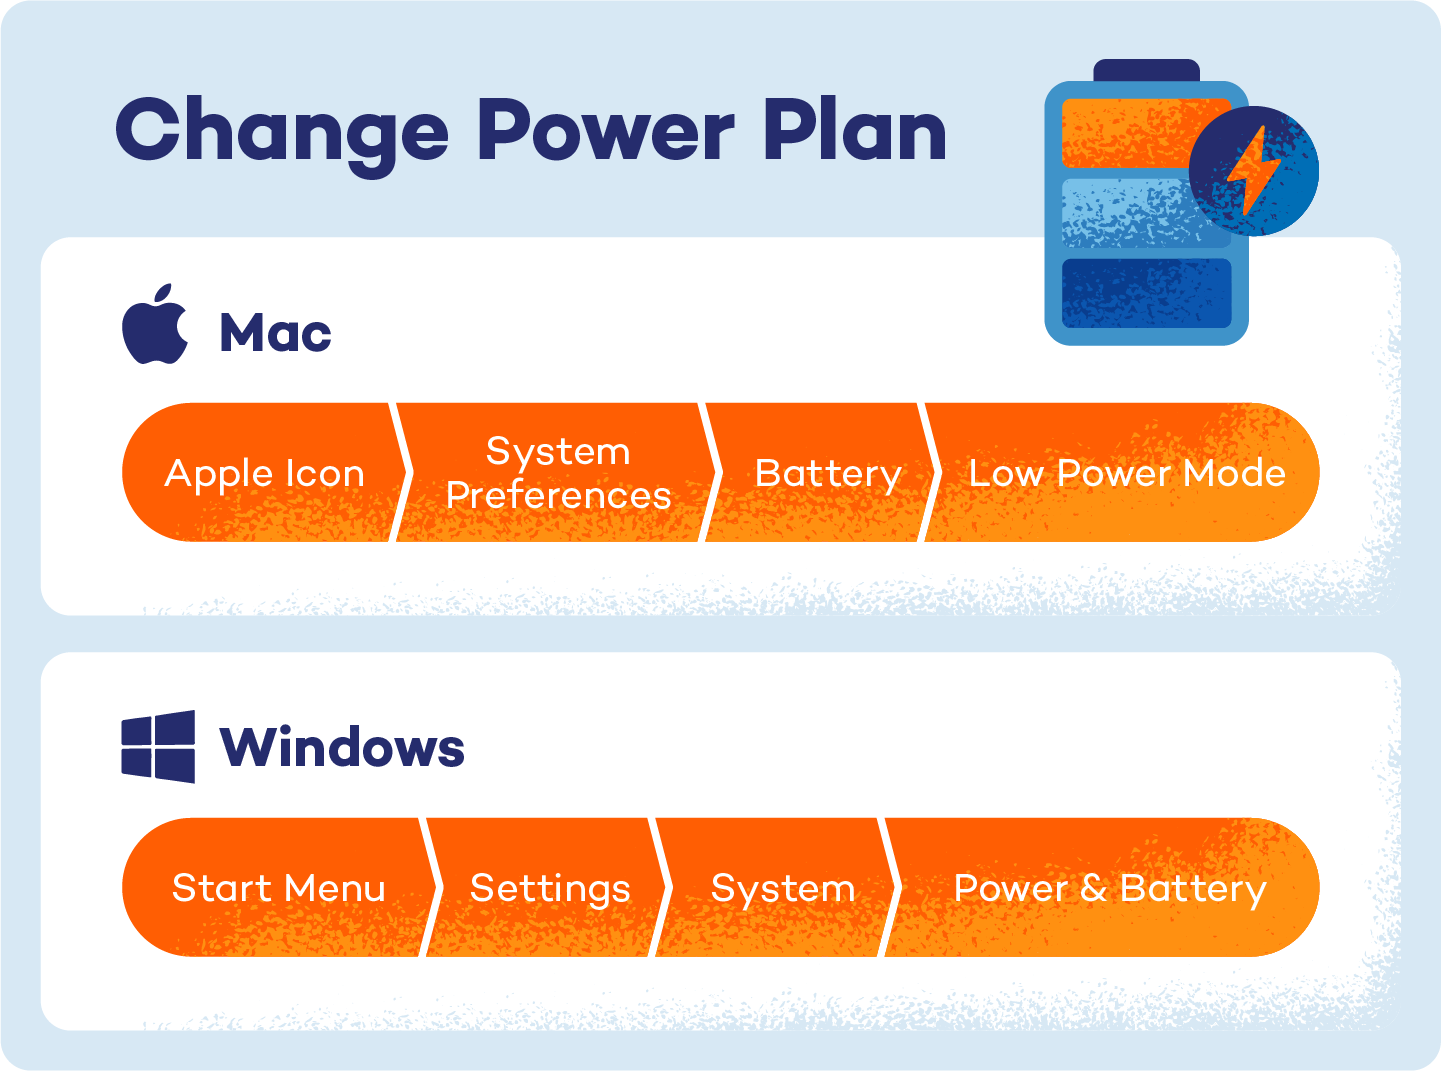 Illustration showing how to change power plan on Mac and Windows